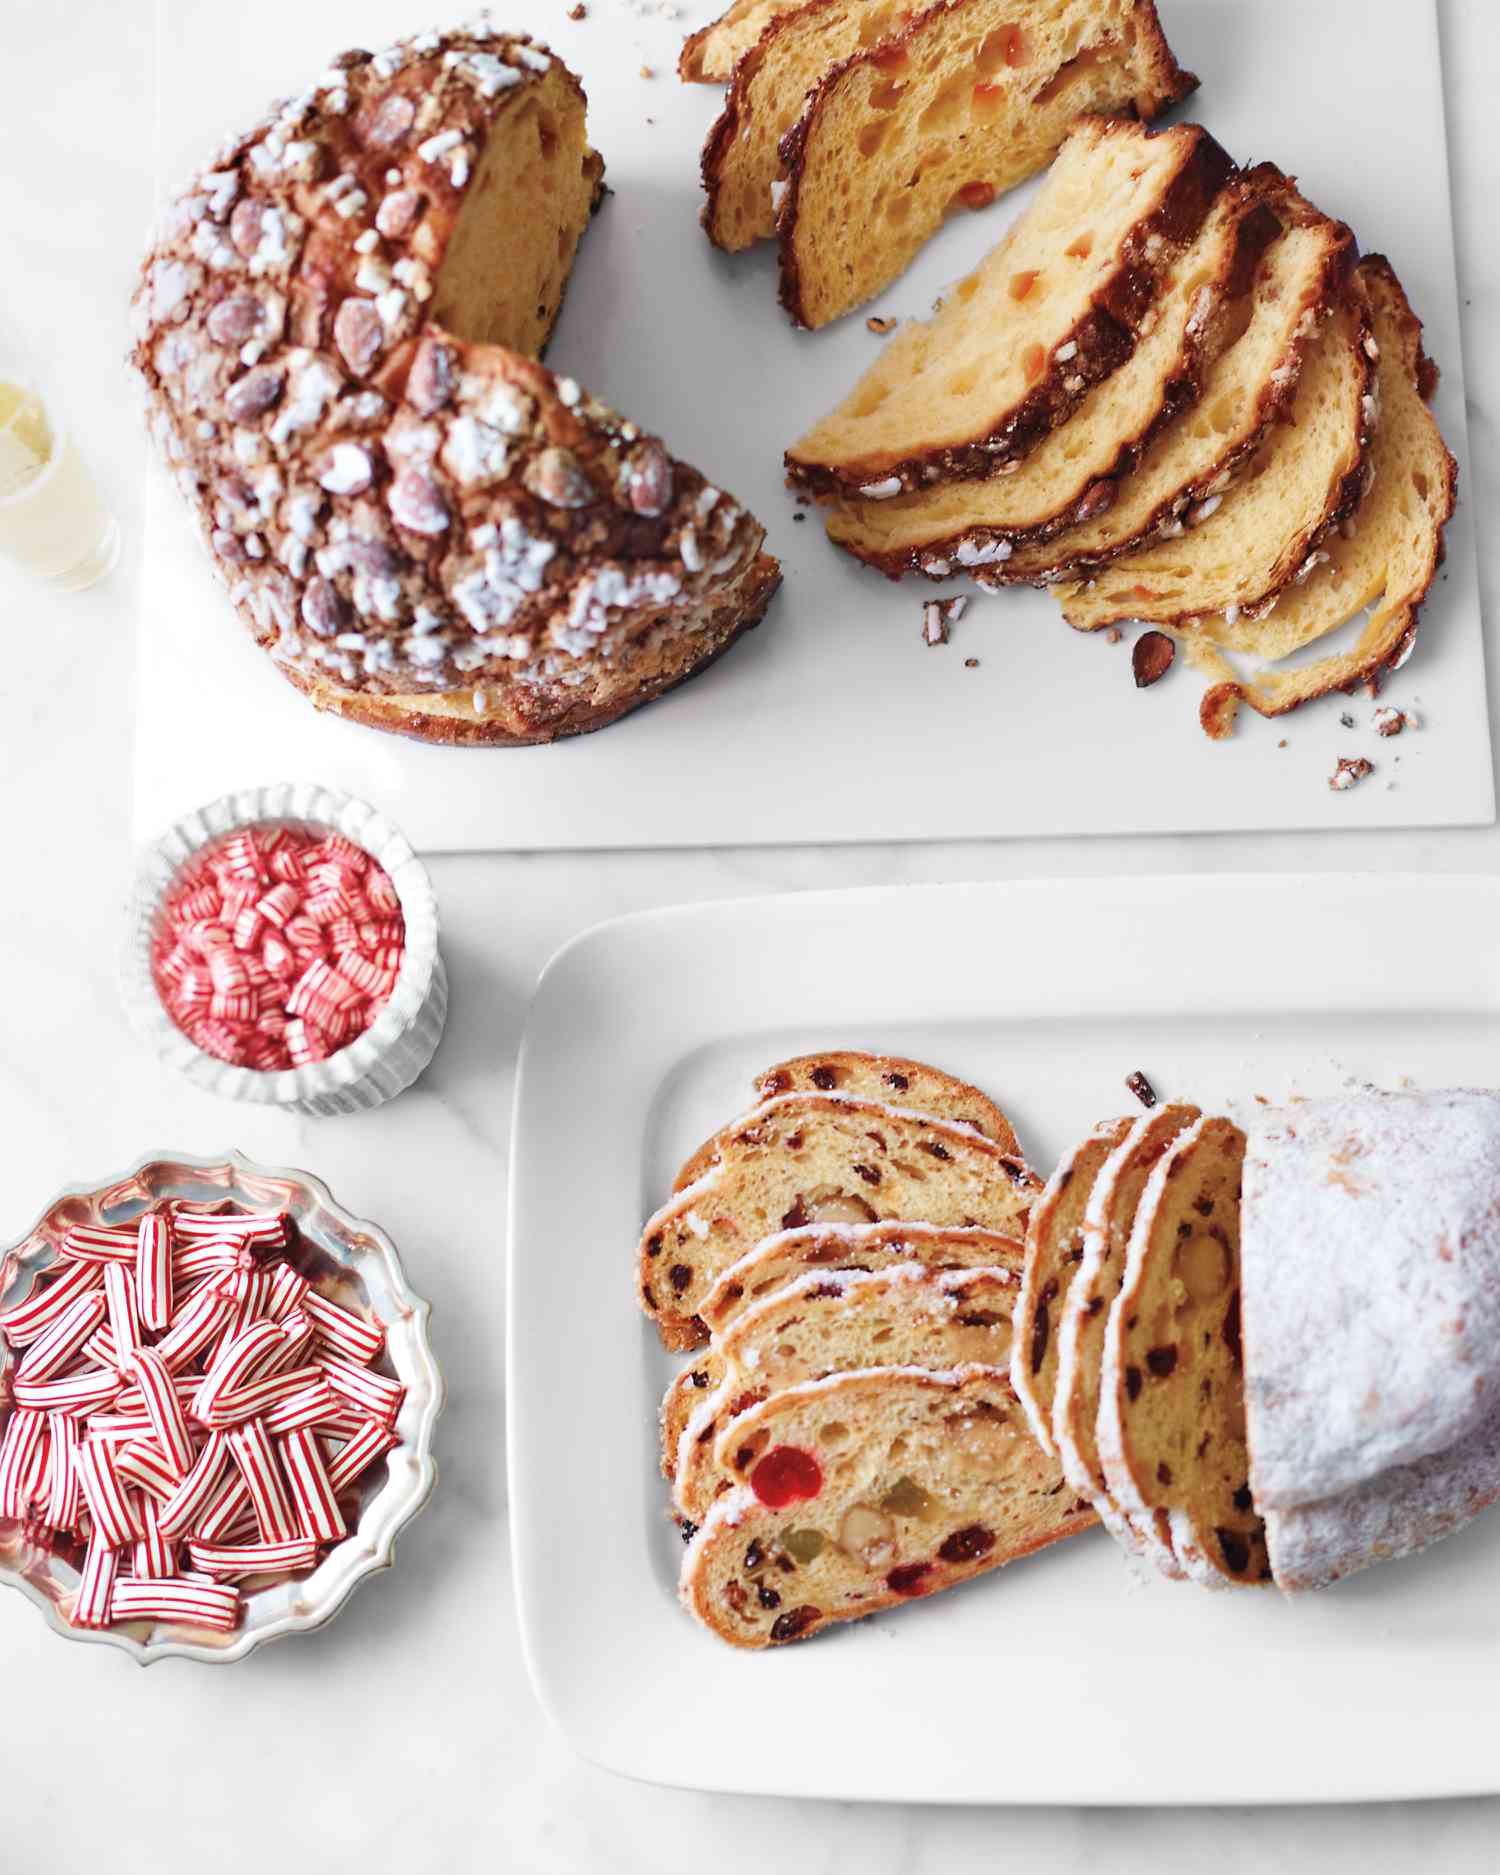 Panettone, Stollen with Marzipan, and Seasonal Candies